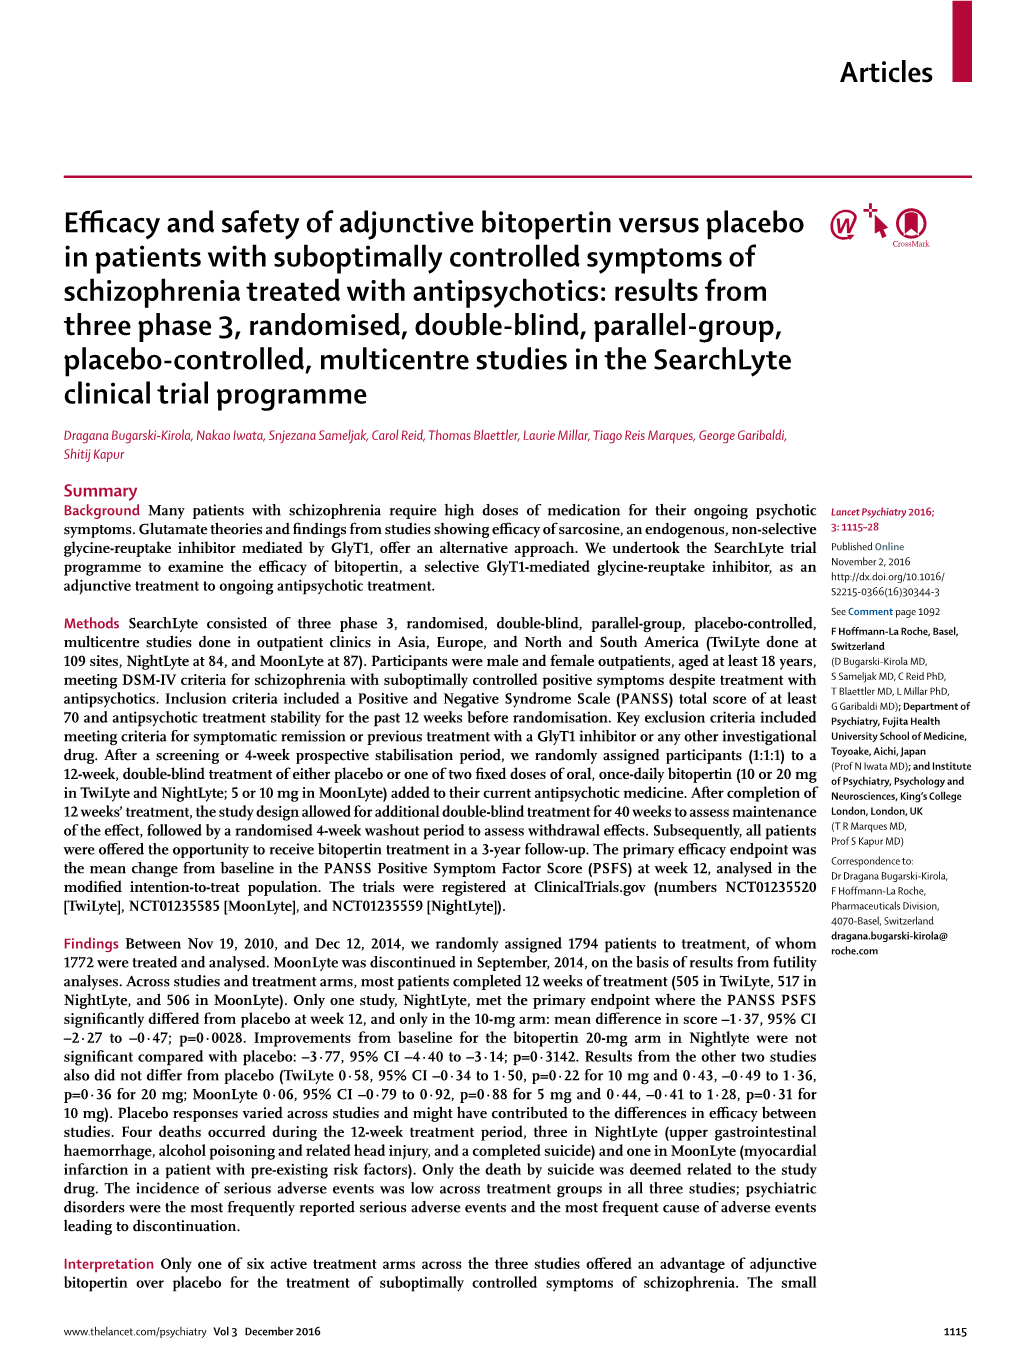 Efficacy and Safety of Adjunctive Bitopertin Versus Placebo In